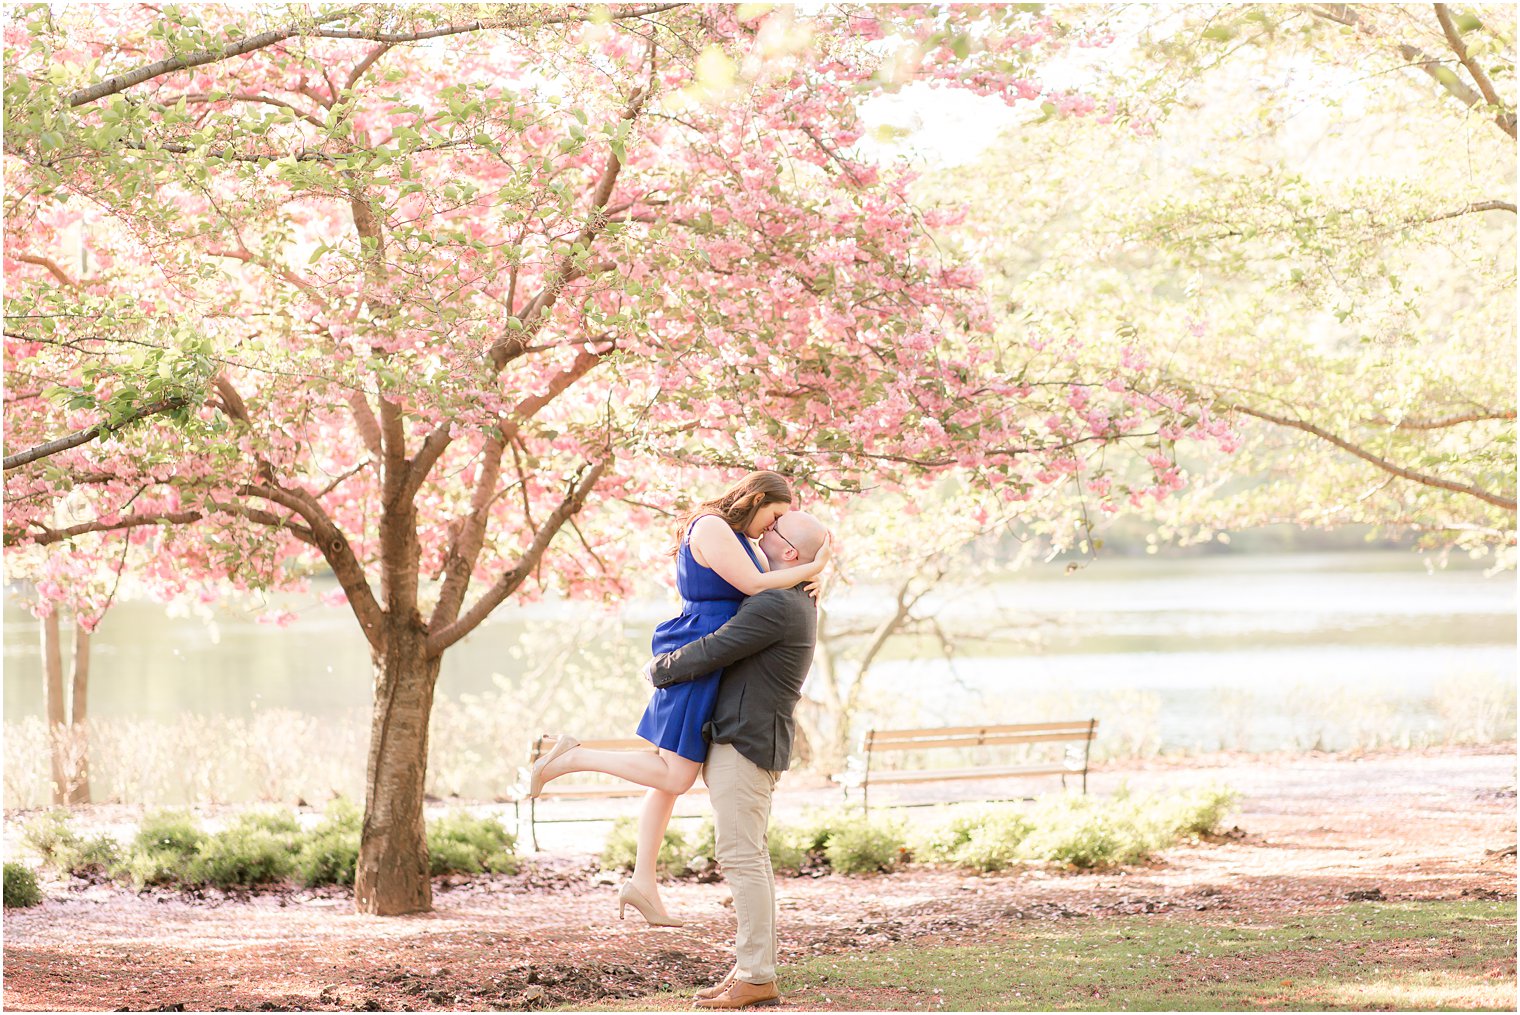 Man lifting woman for a kiss at Branch Brook Park for engagement photo